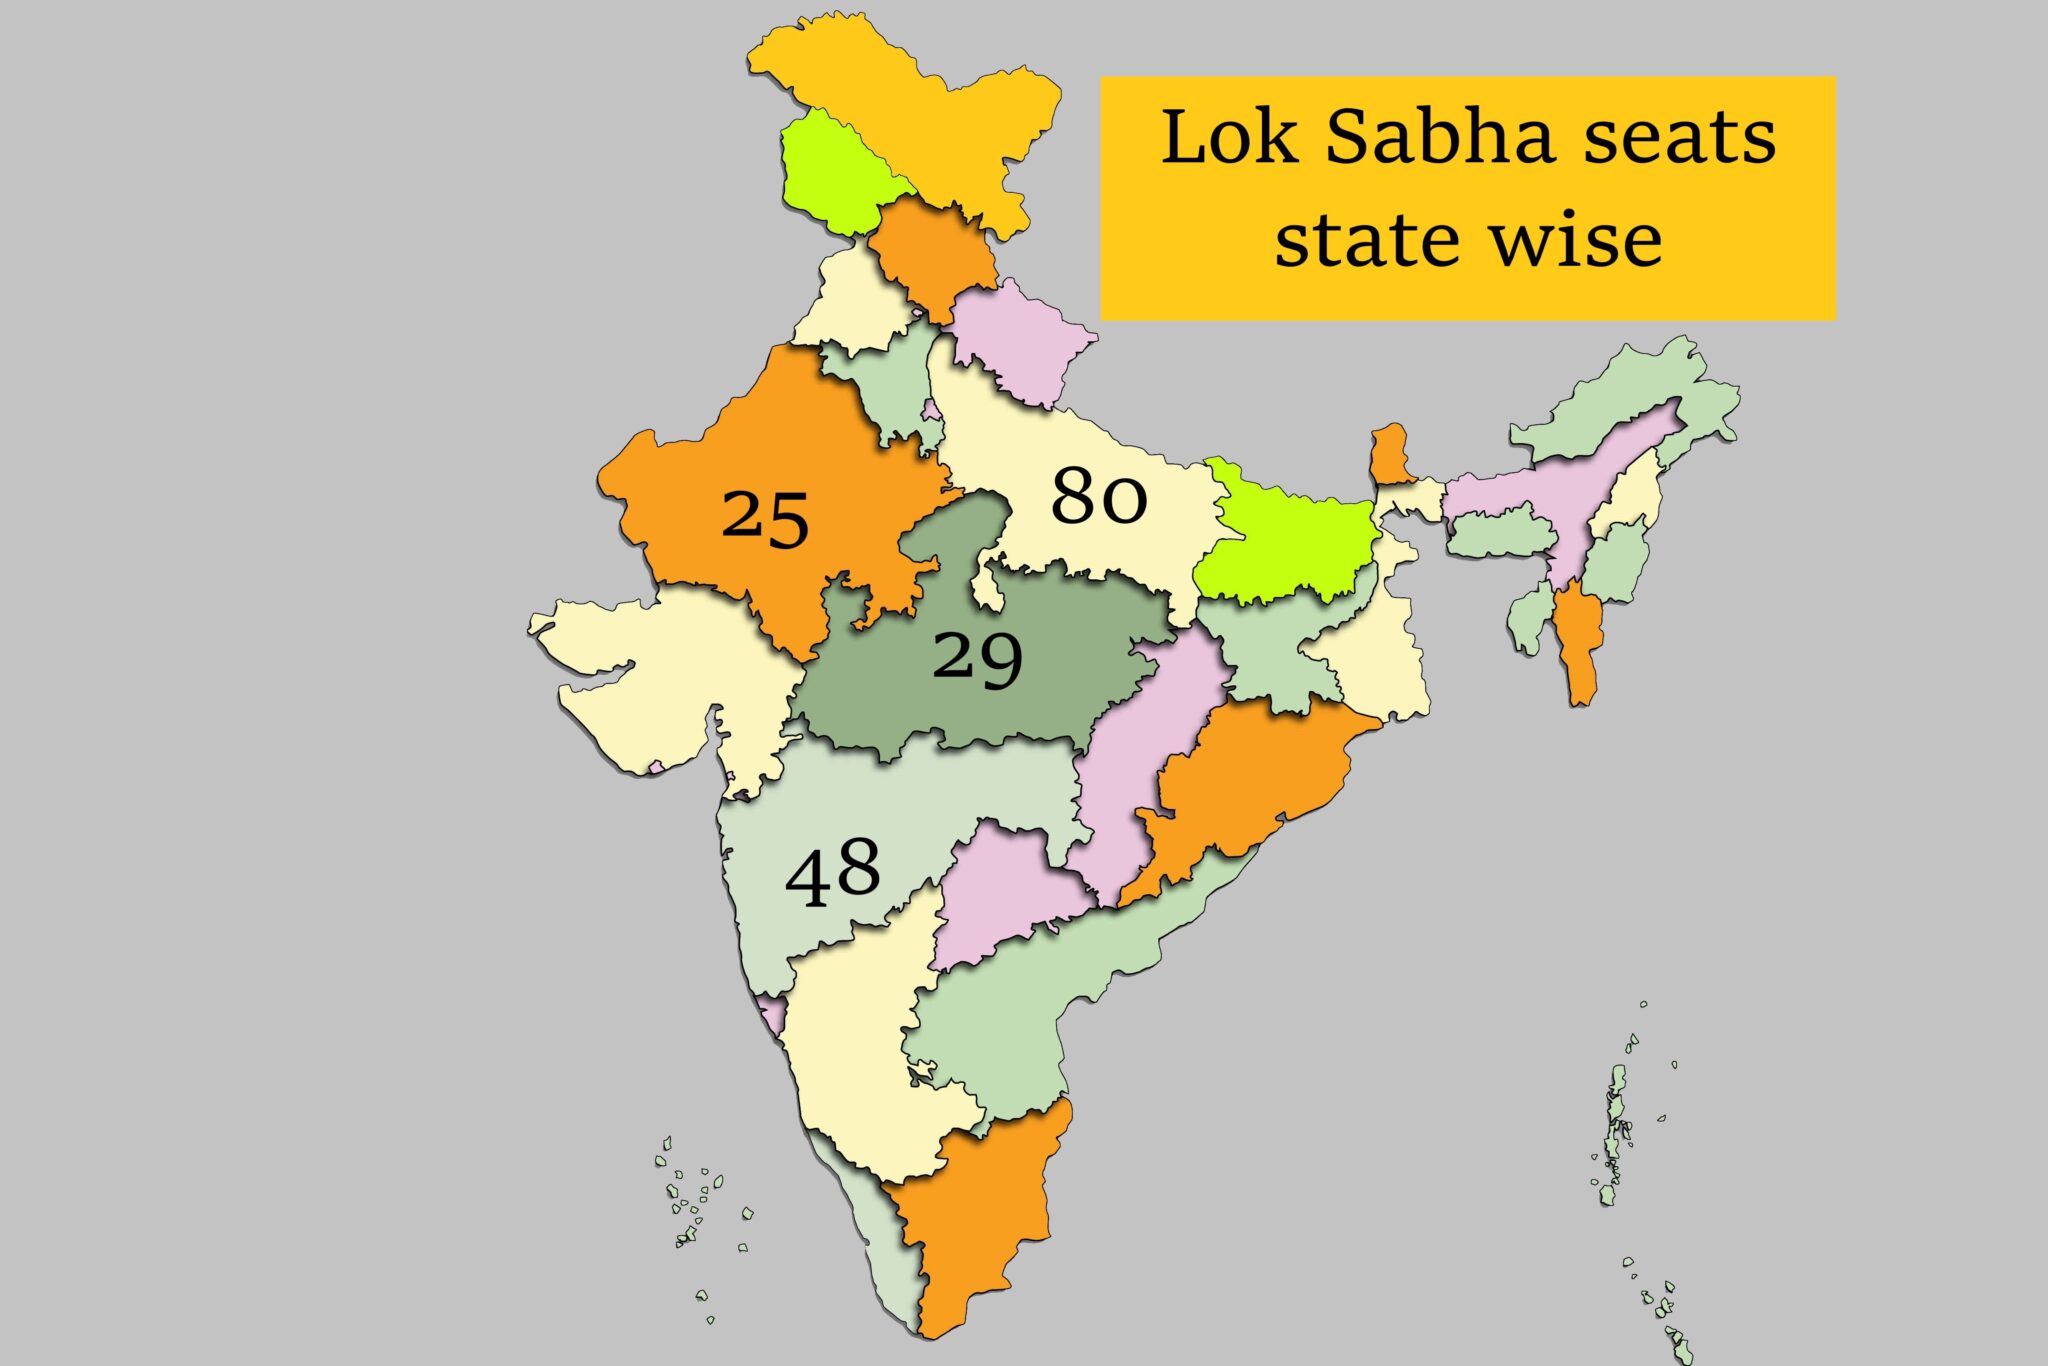 Lok Sabha seats in India Statewise composition interesting facts